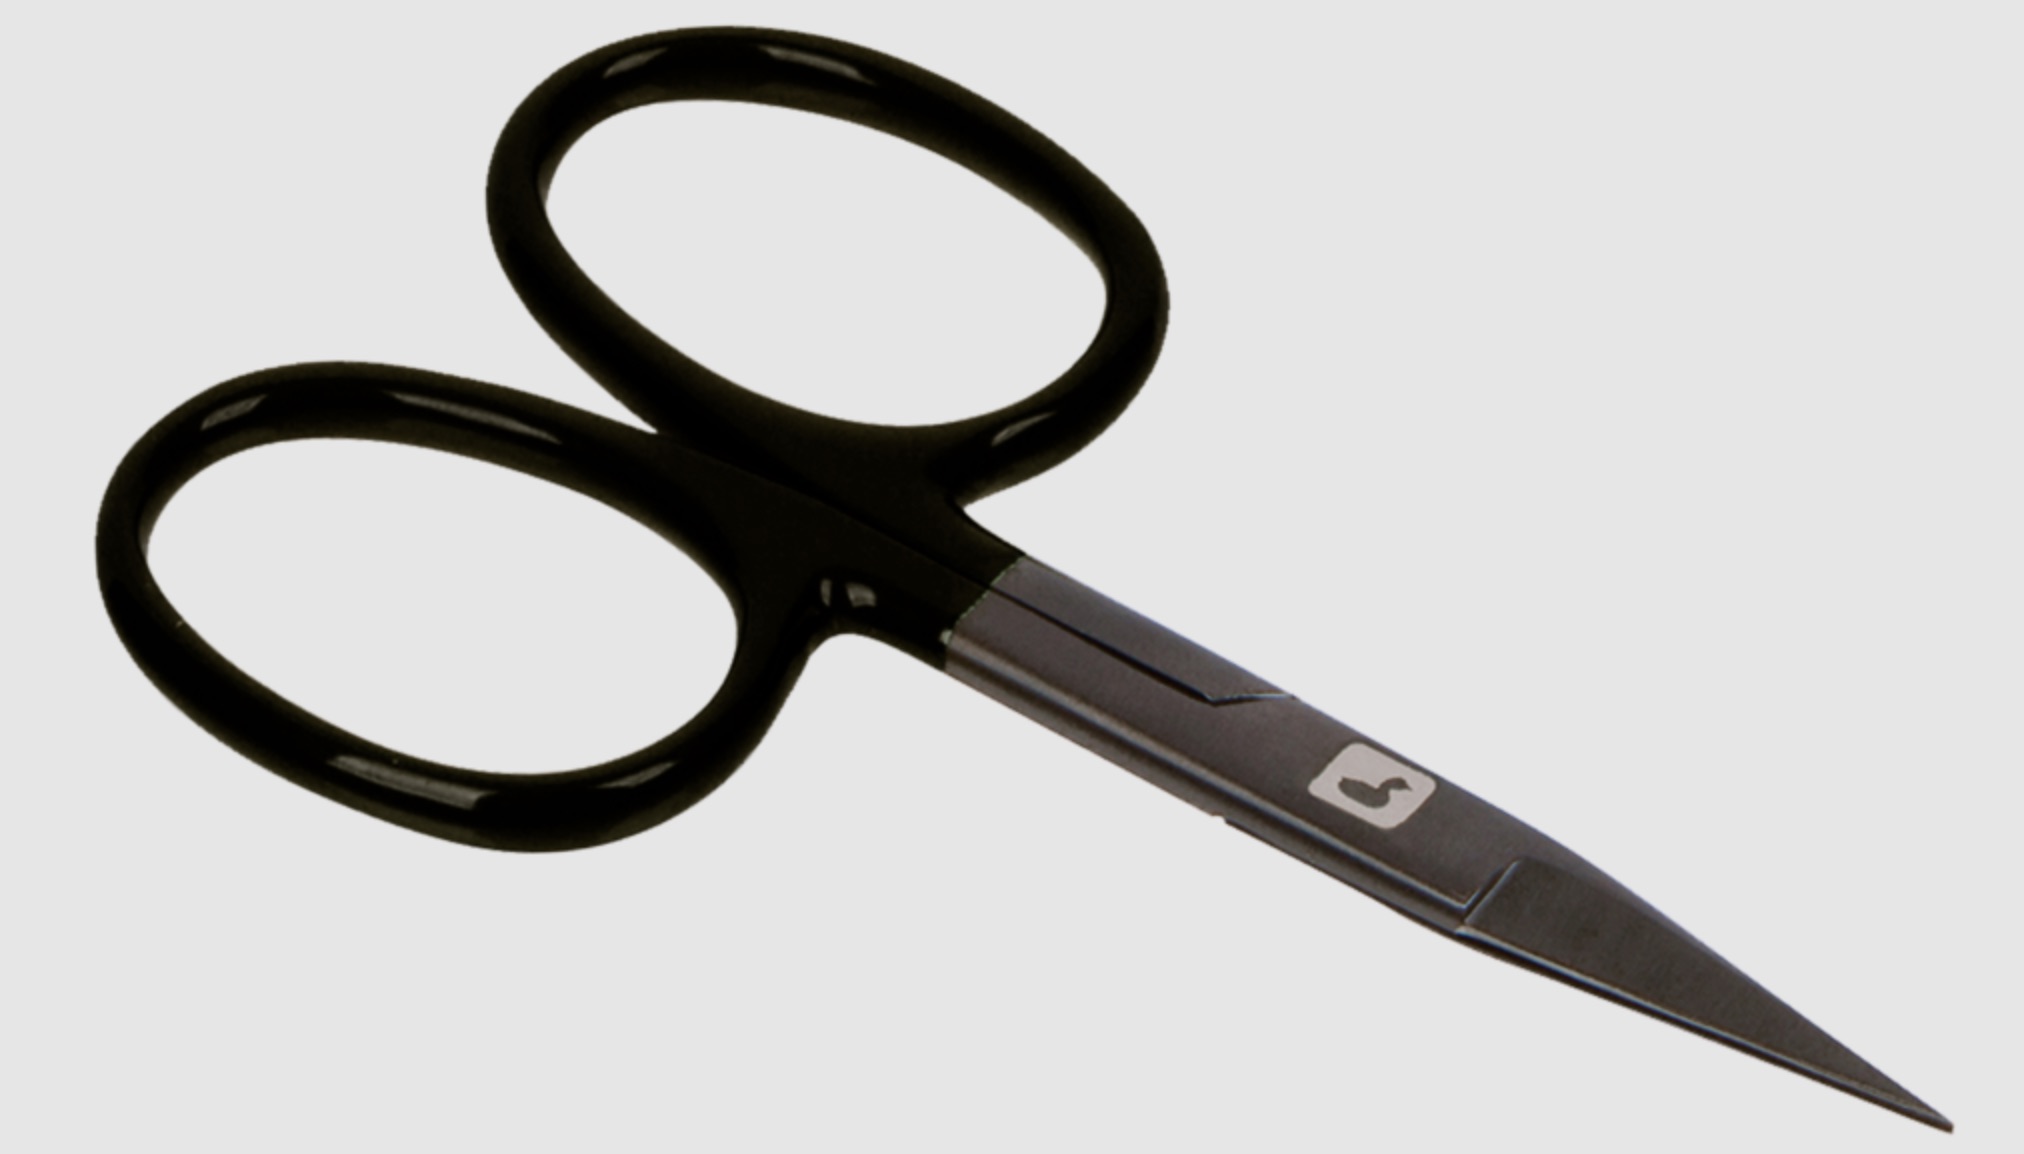 https://waterswest.com/store/images/products/loon-ergo-all-purpose-scissors-black.jpg